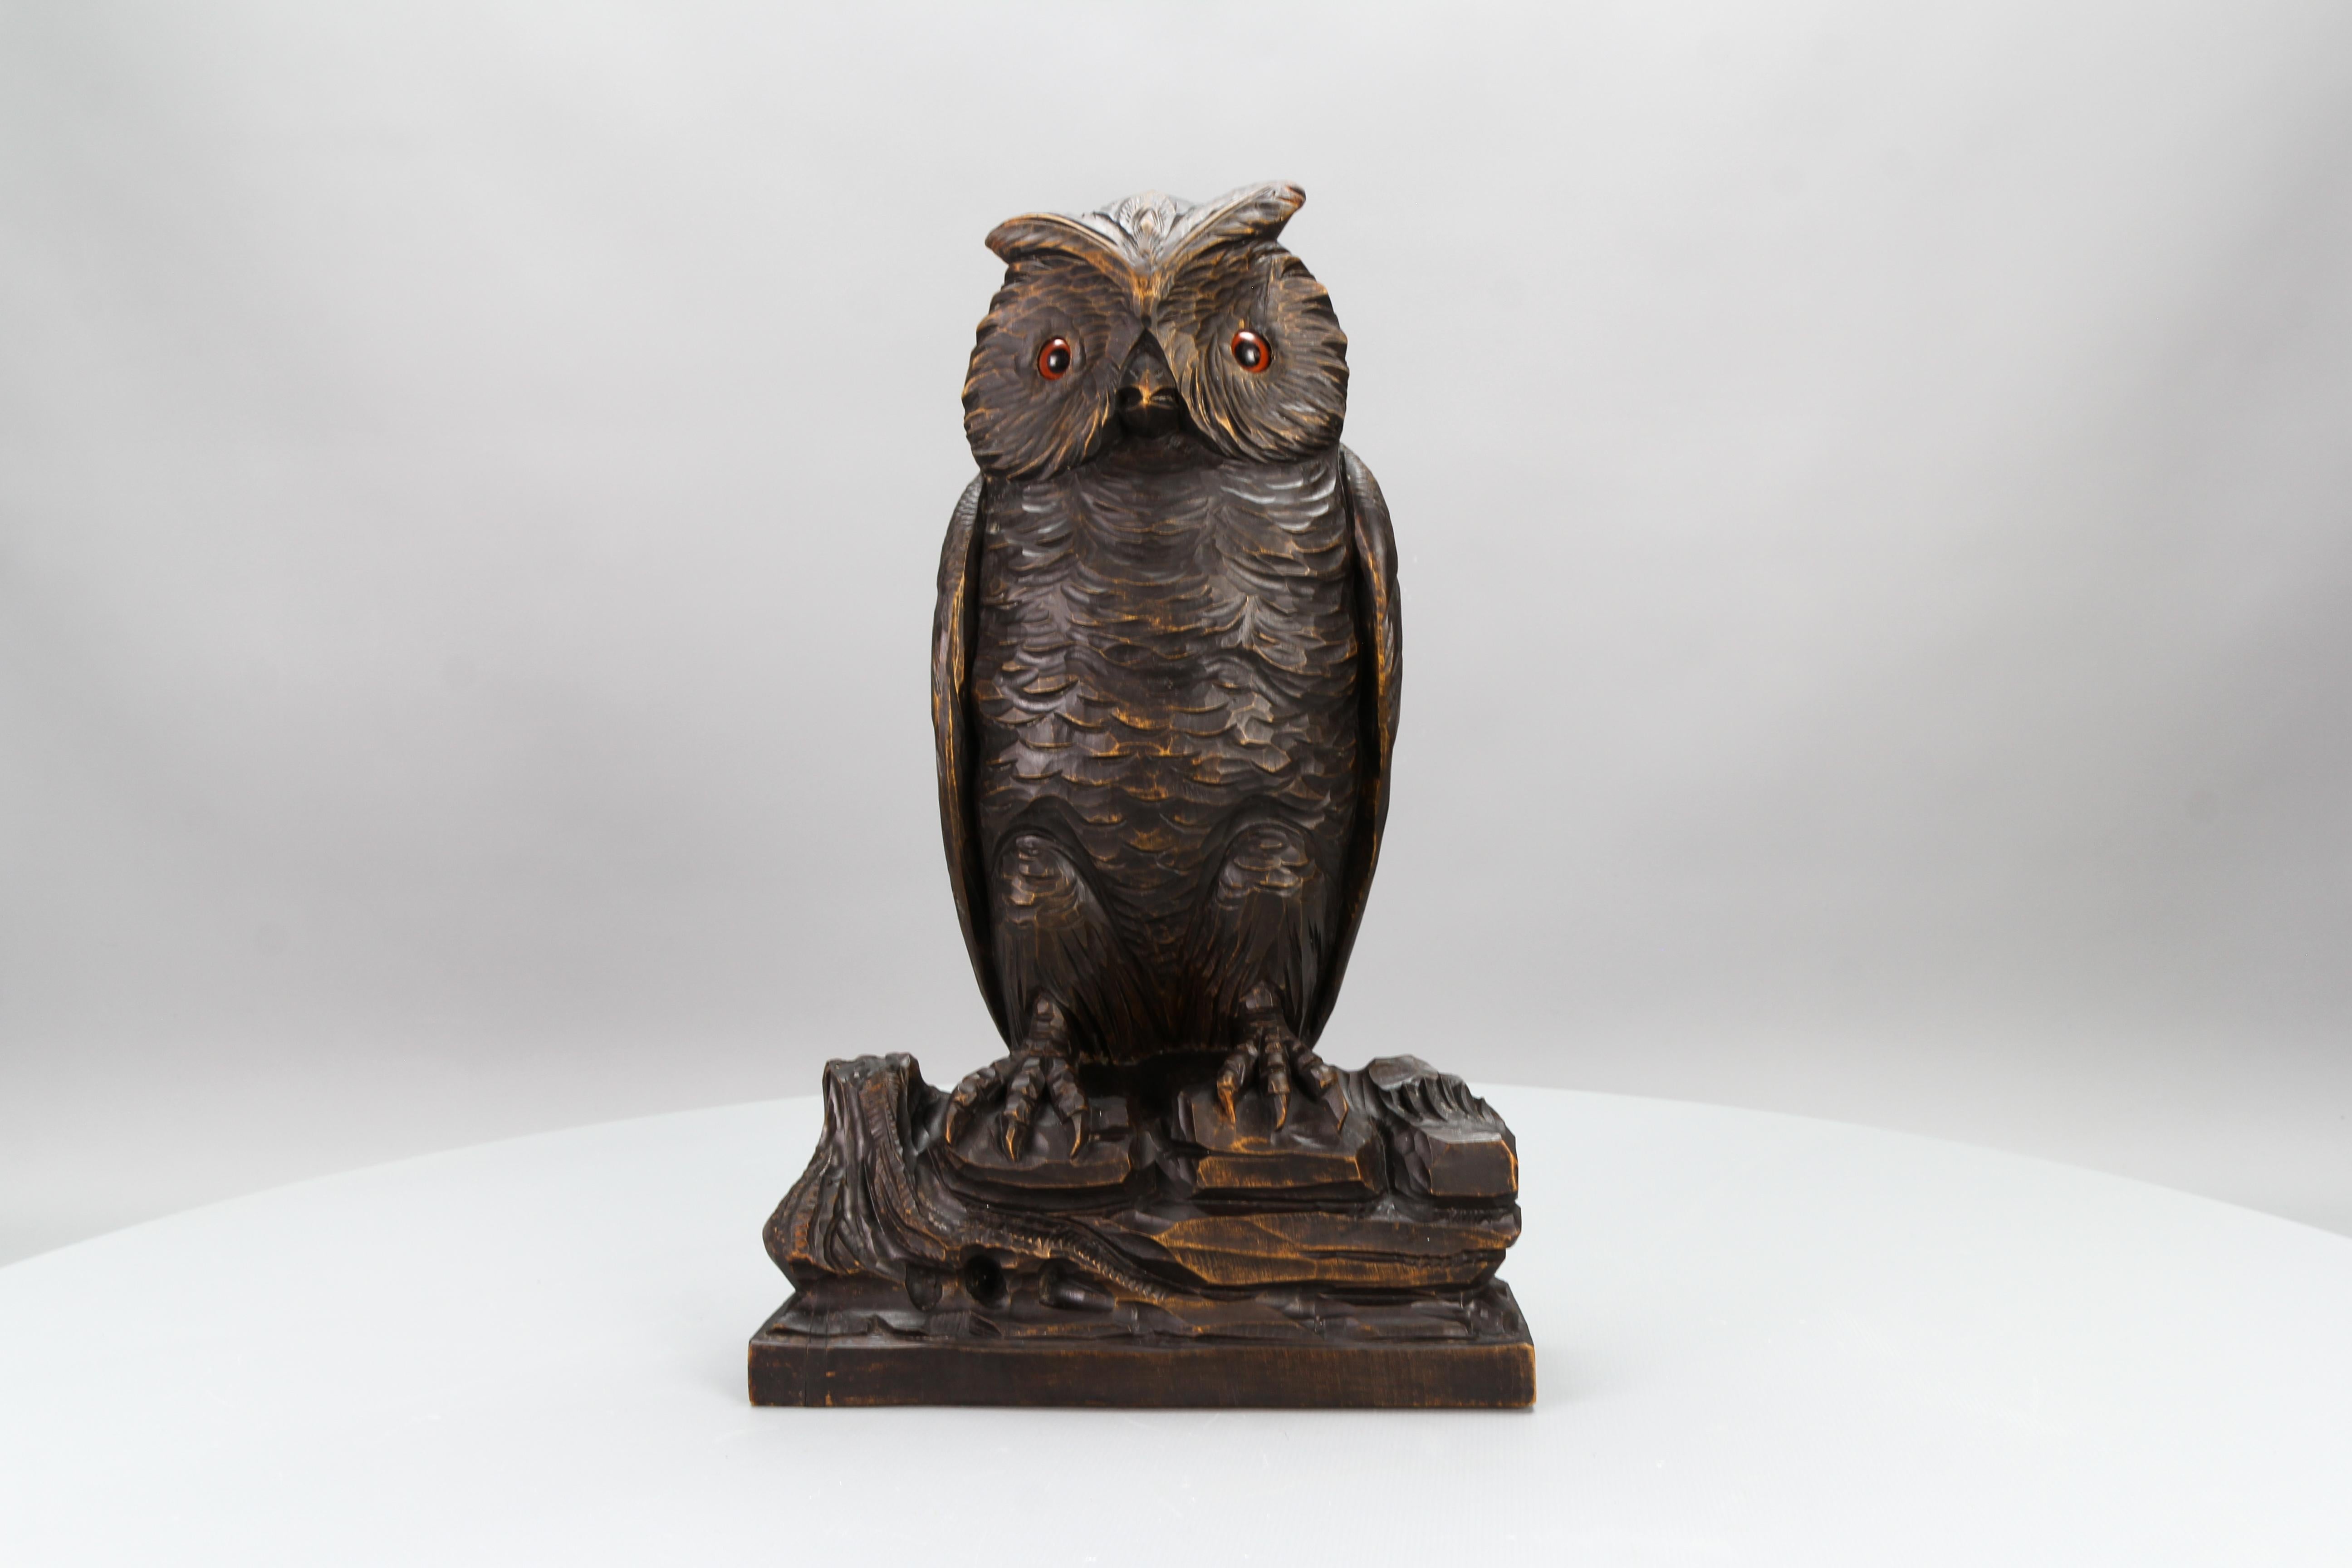 An antique Black Forest style hand-carved Lindenwood owl sculpture, Germany, circa 1920.
This impressive naturalistically carved dark brown wooden owl with glass eyes, sitting on a wood, would be a great eye-catcher in any room or